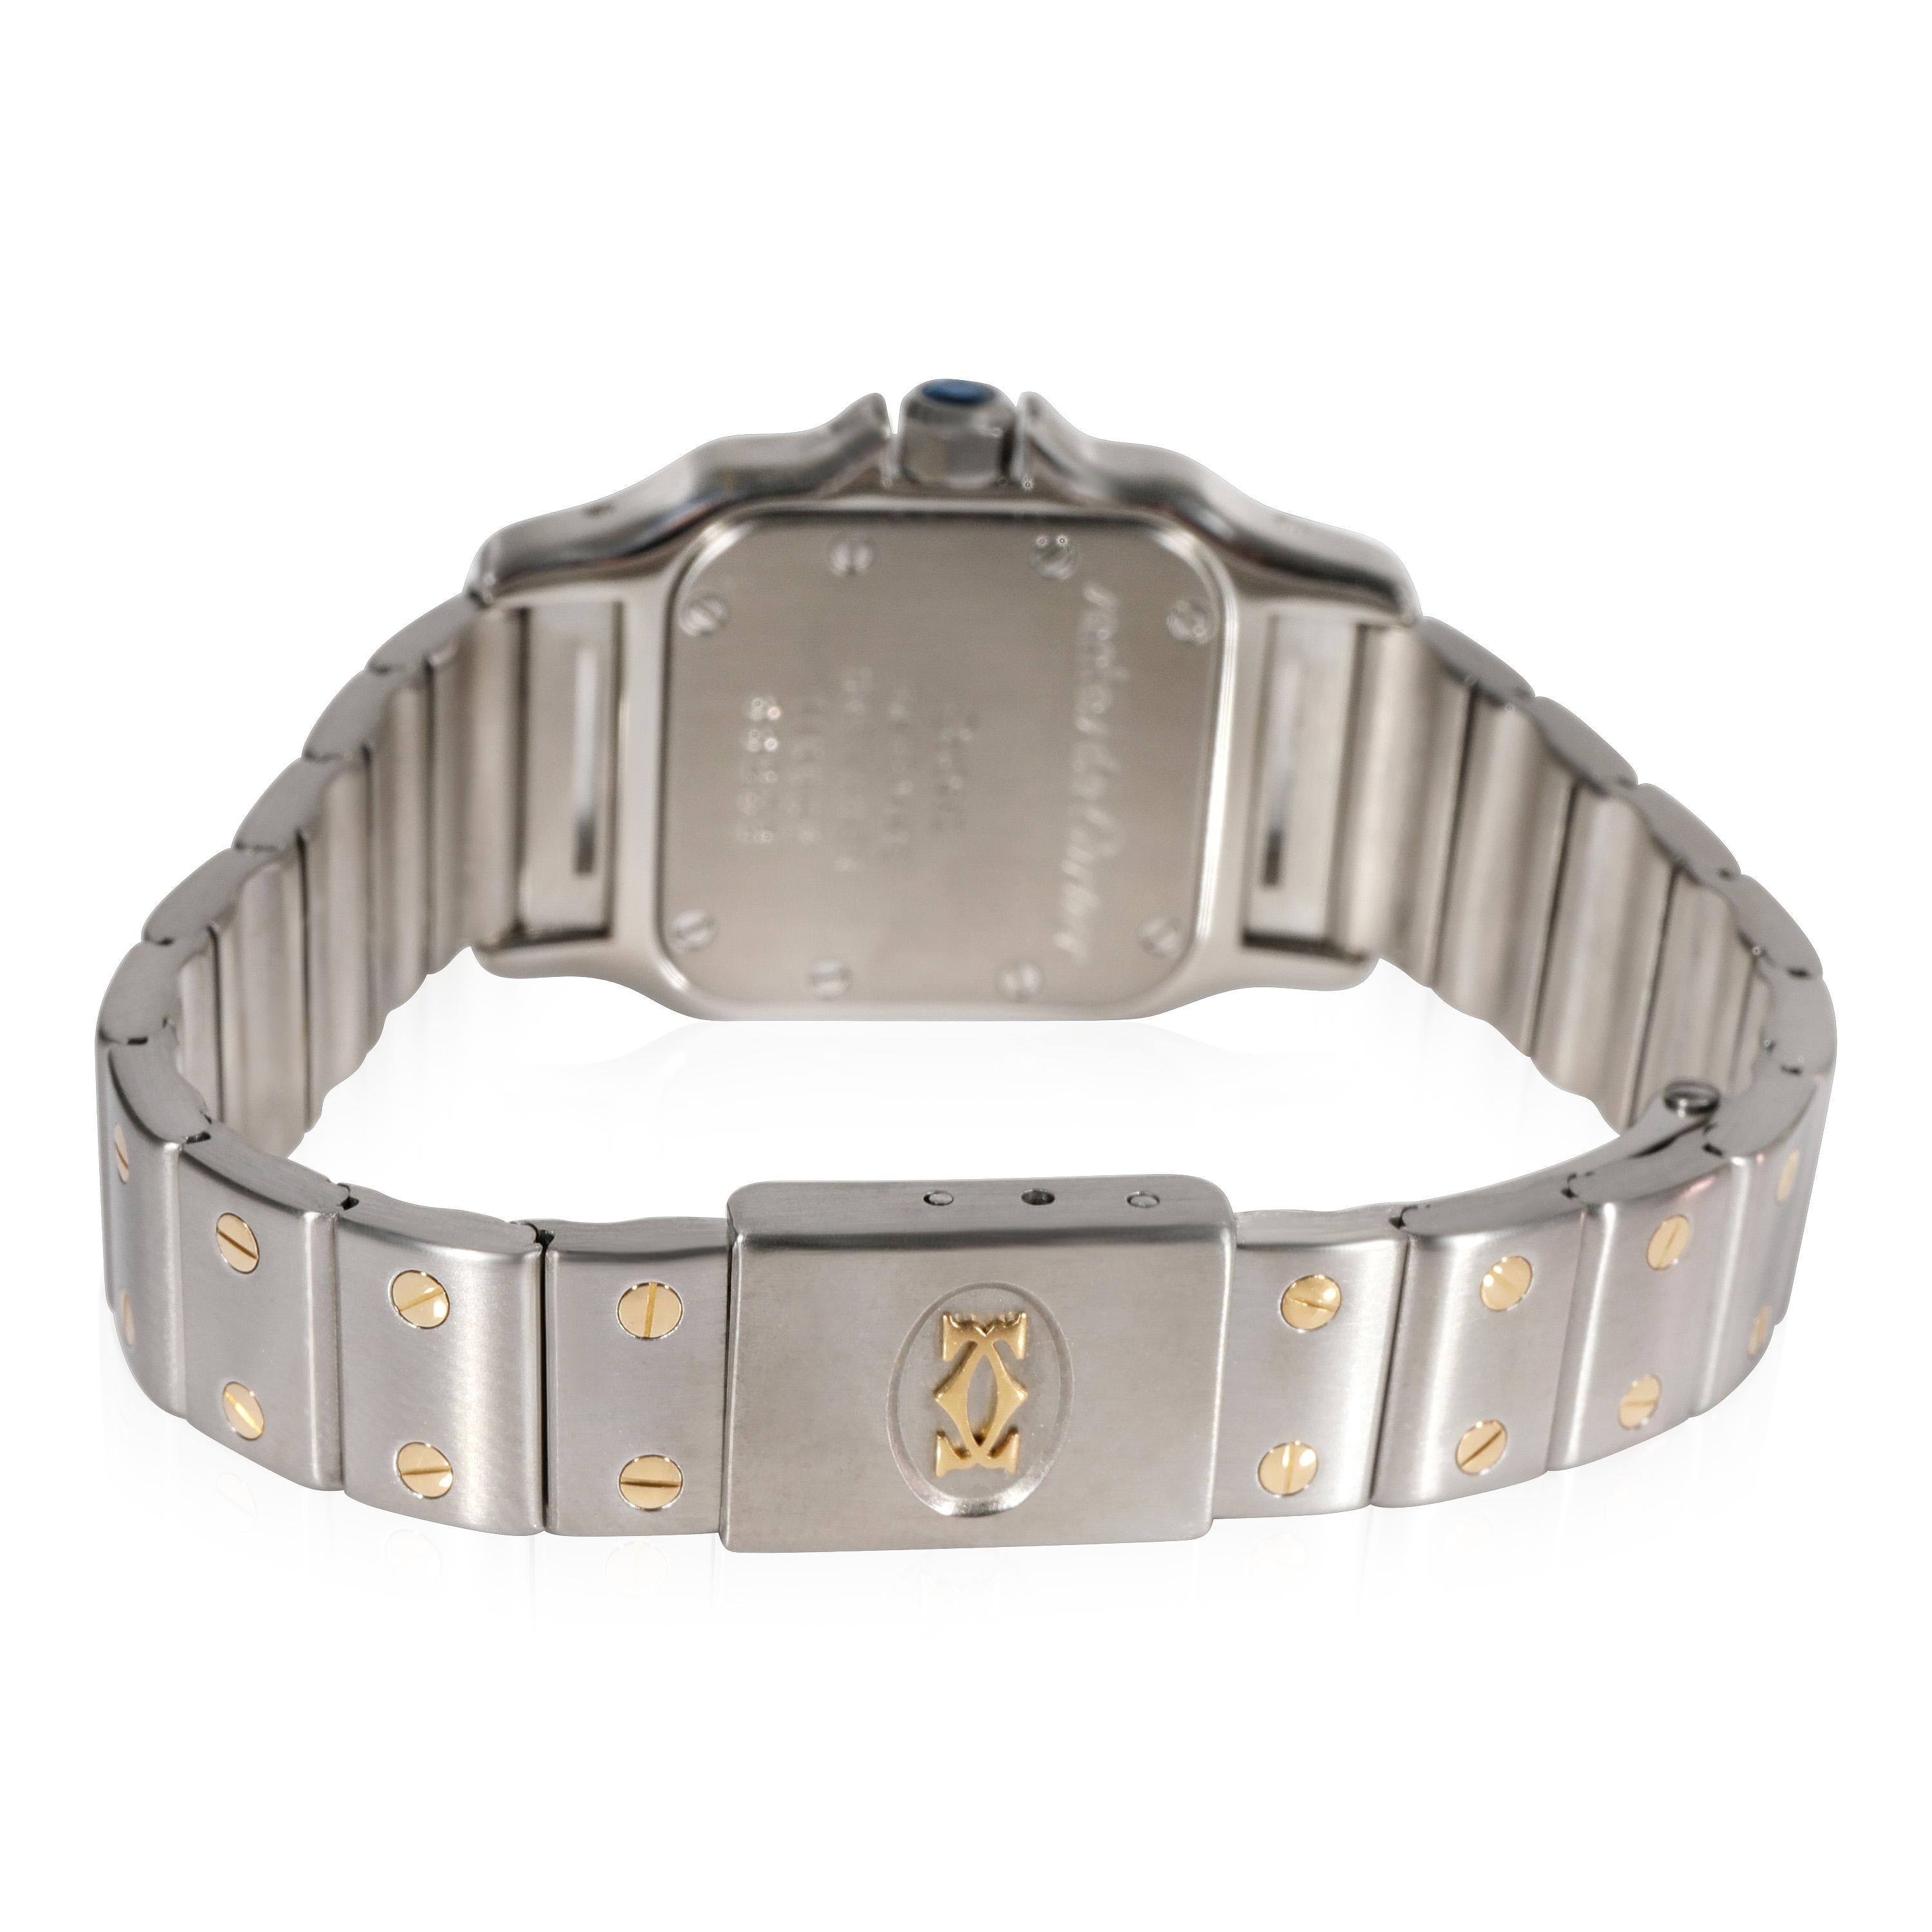 Cartier Santos Galbee 119902 Women's Watch in  Stainless Steel/Yellow Gold

SKU: 119477

PRIMARY DETAILS
Brand: Cartier
Model: Santos Galbee
Country of Origin: Switzerland
Movement Type: Quartz: Battery
Year of Manufacture: 1990-1999
Condition: In